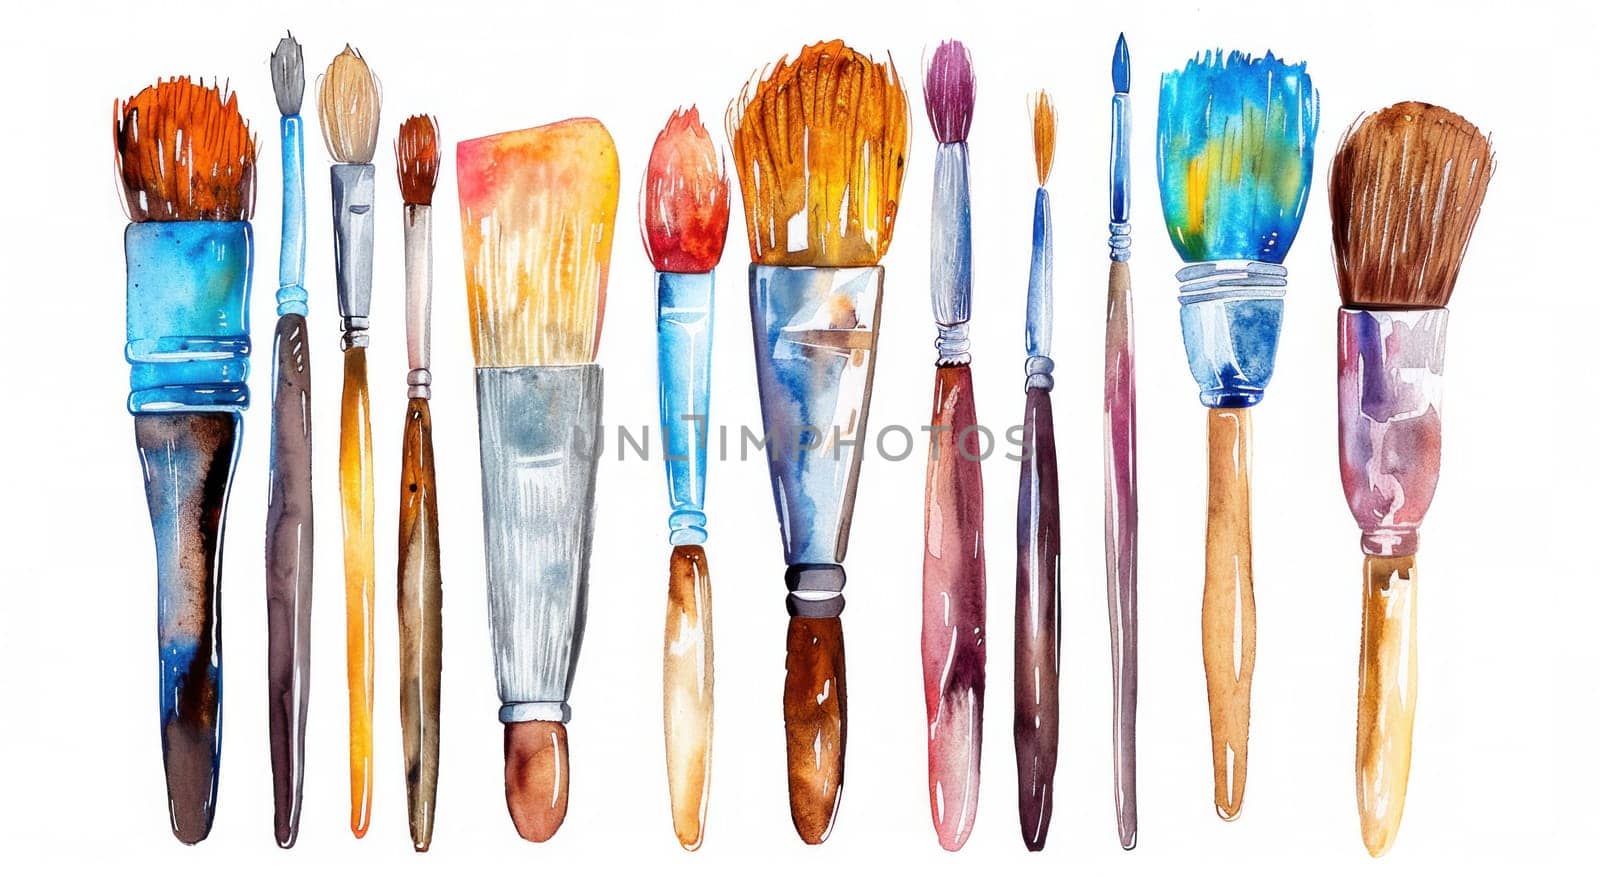 Watercolor art brushes set for painting and illustration, creative tools for artists and hobbyists